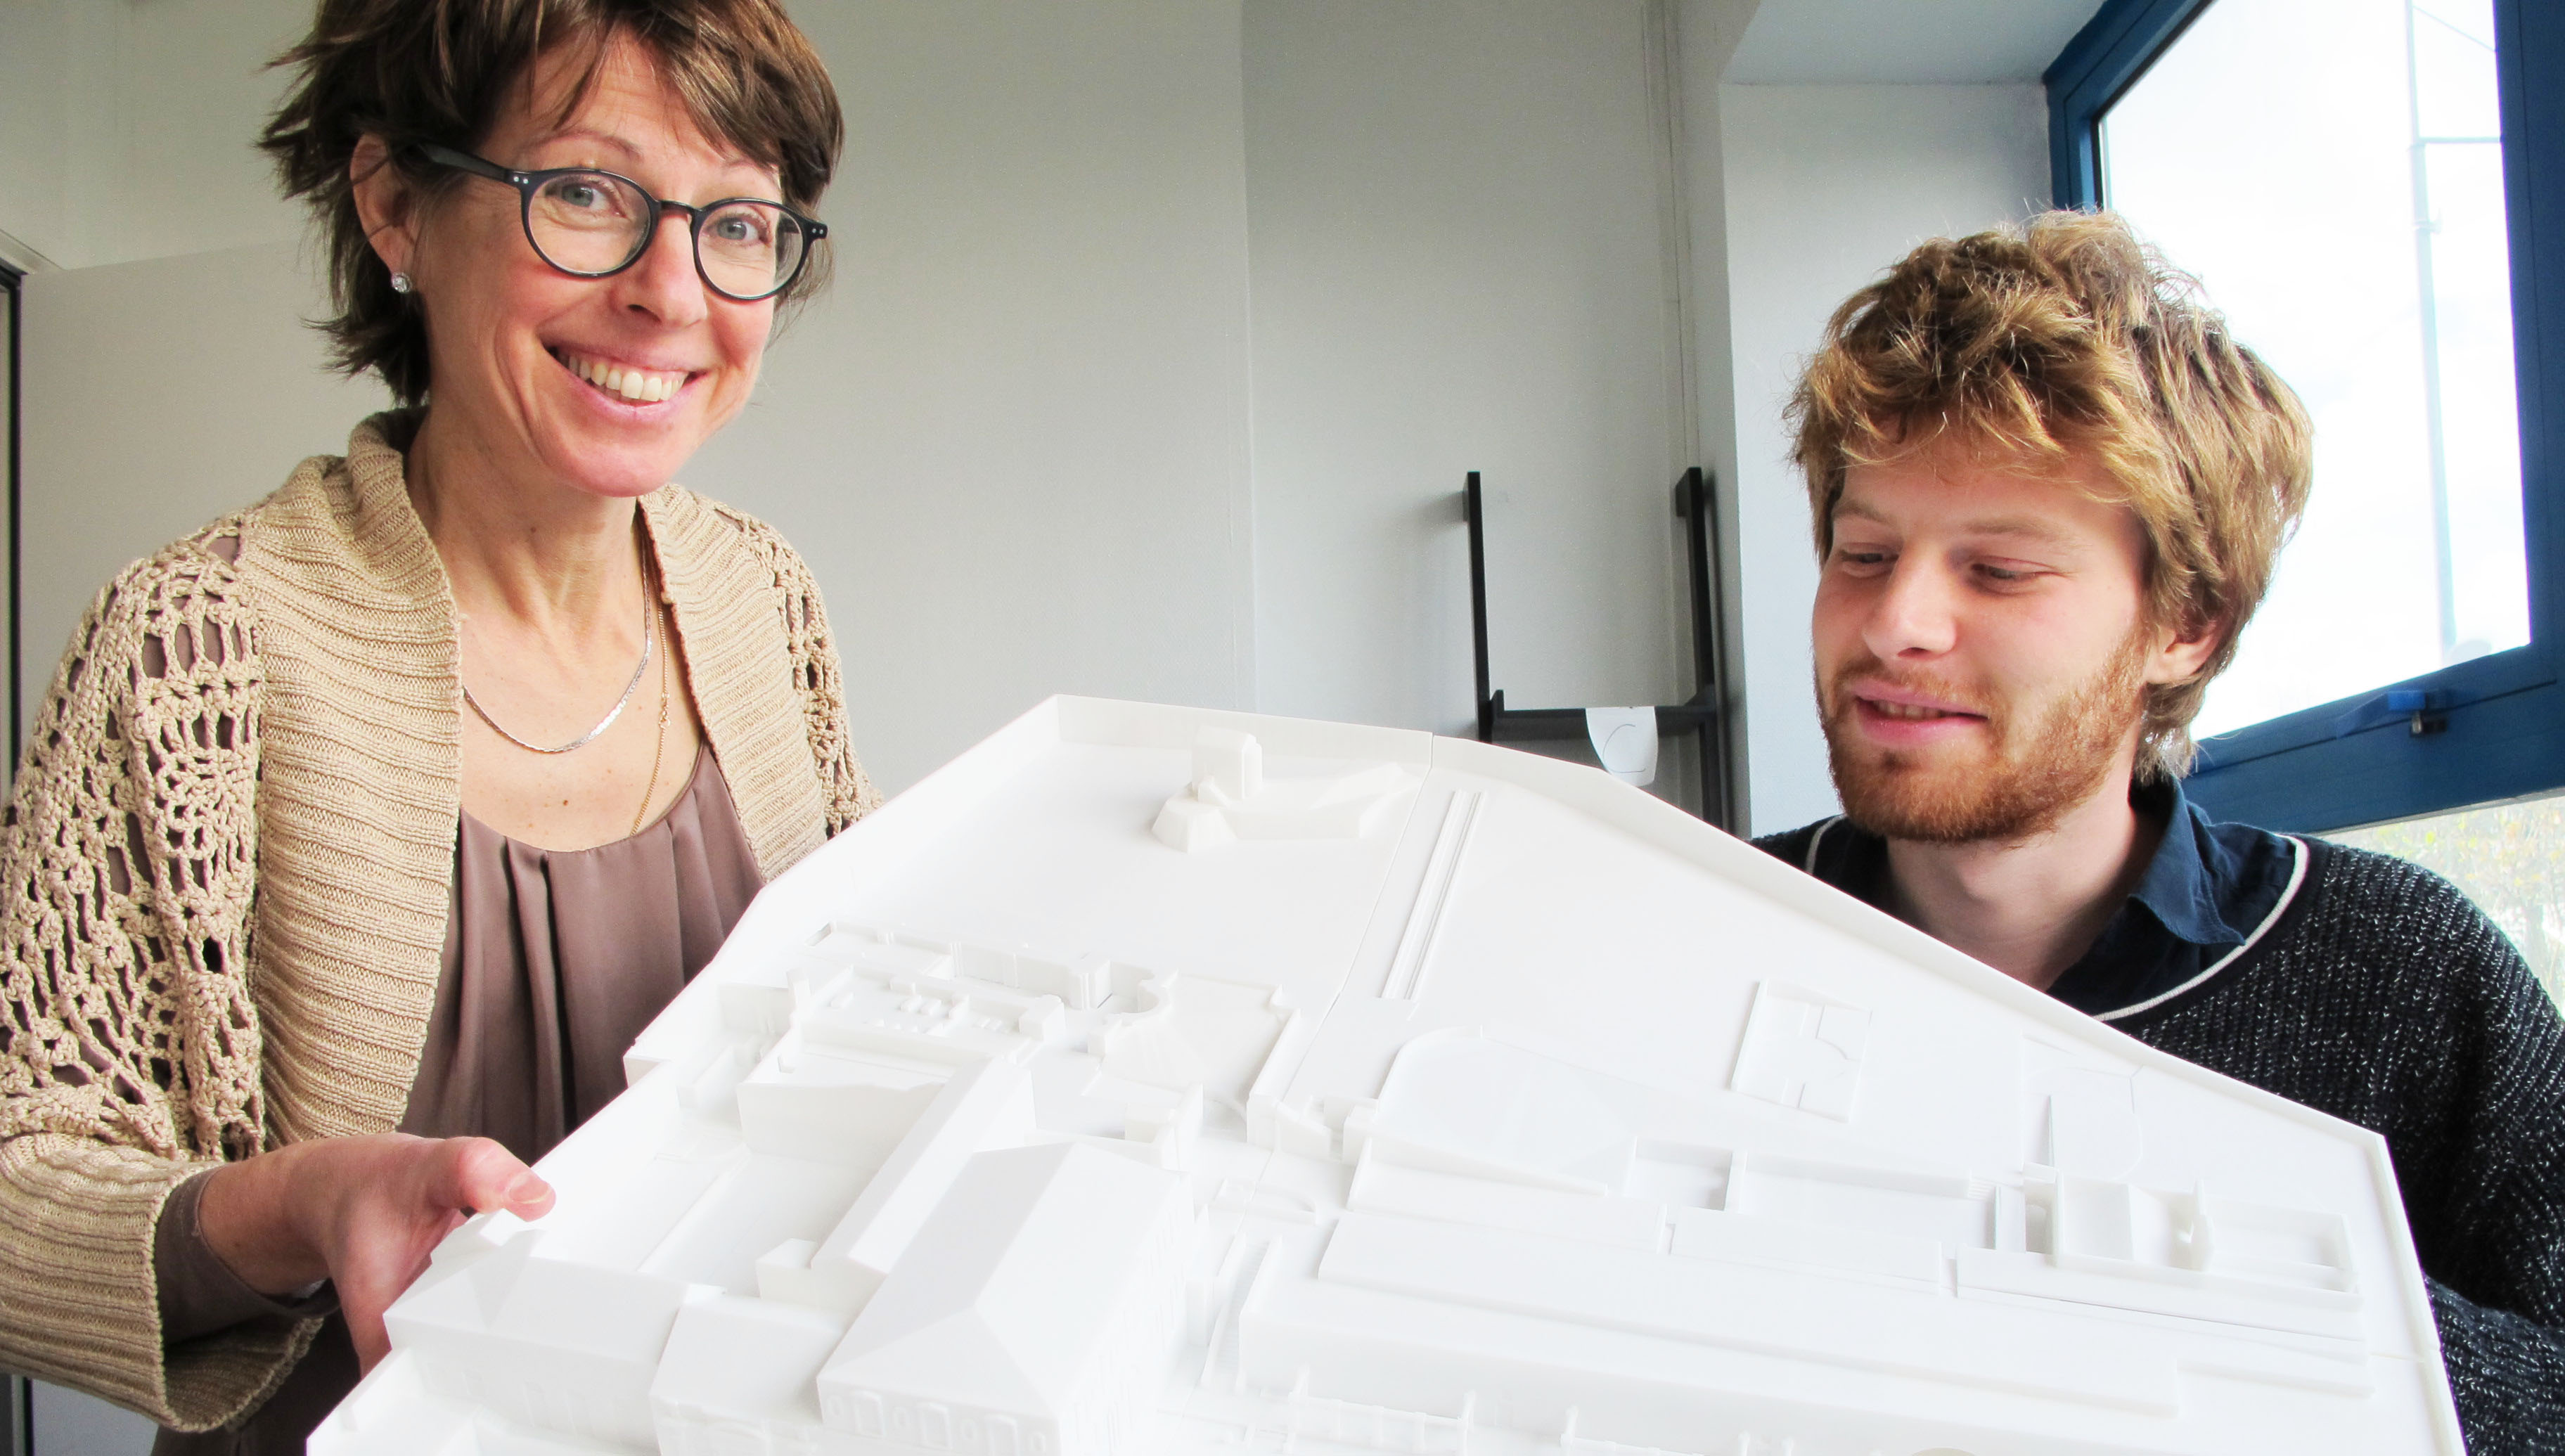 3D Printed Culture: an abbaye model for the visually impaired